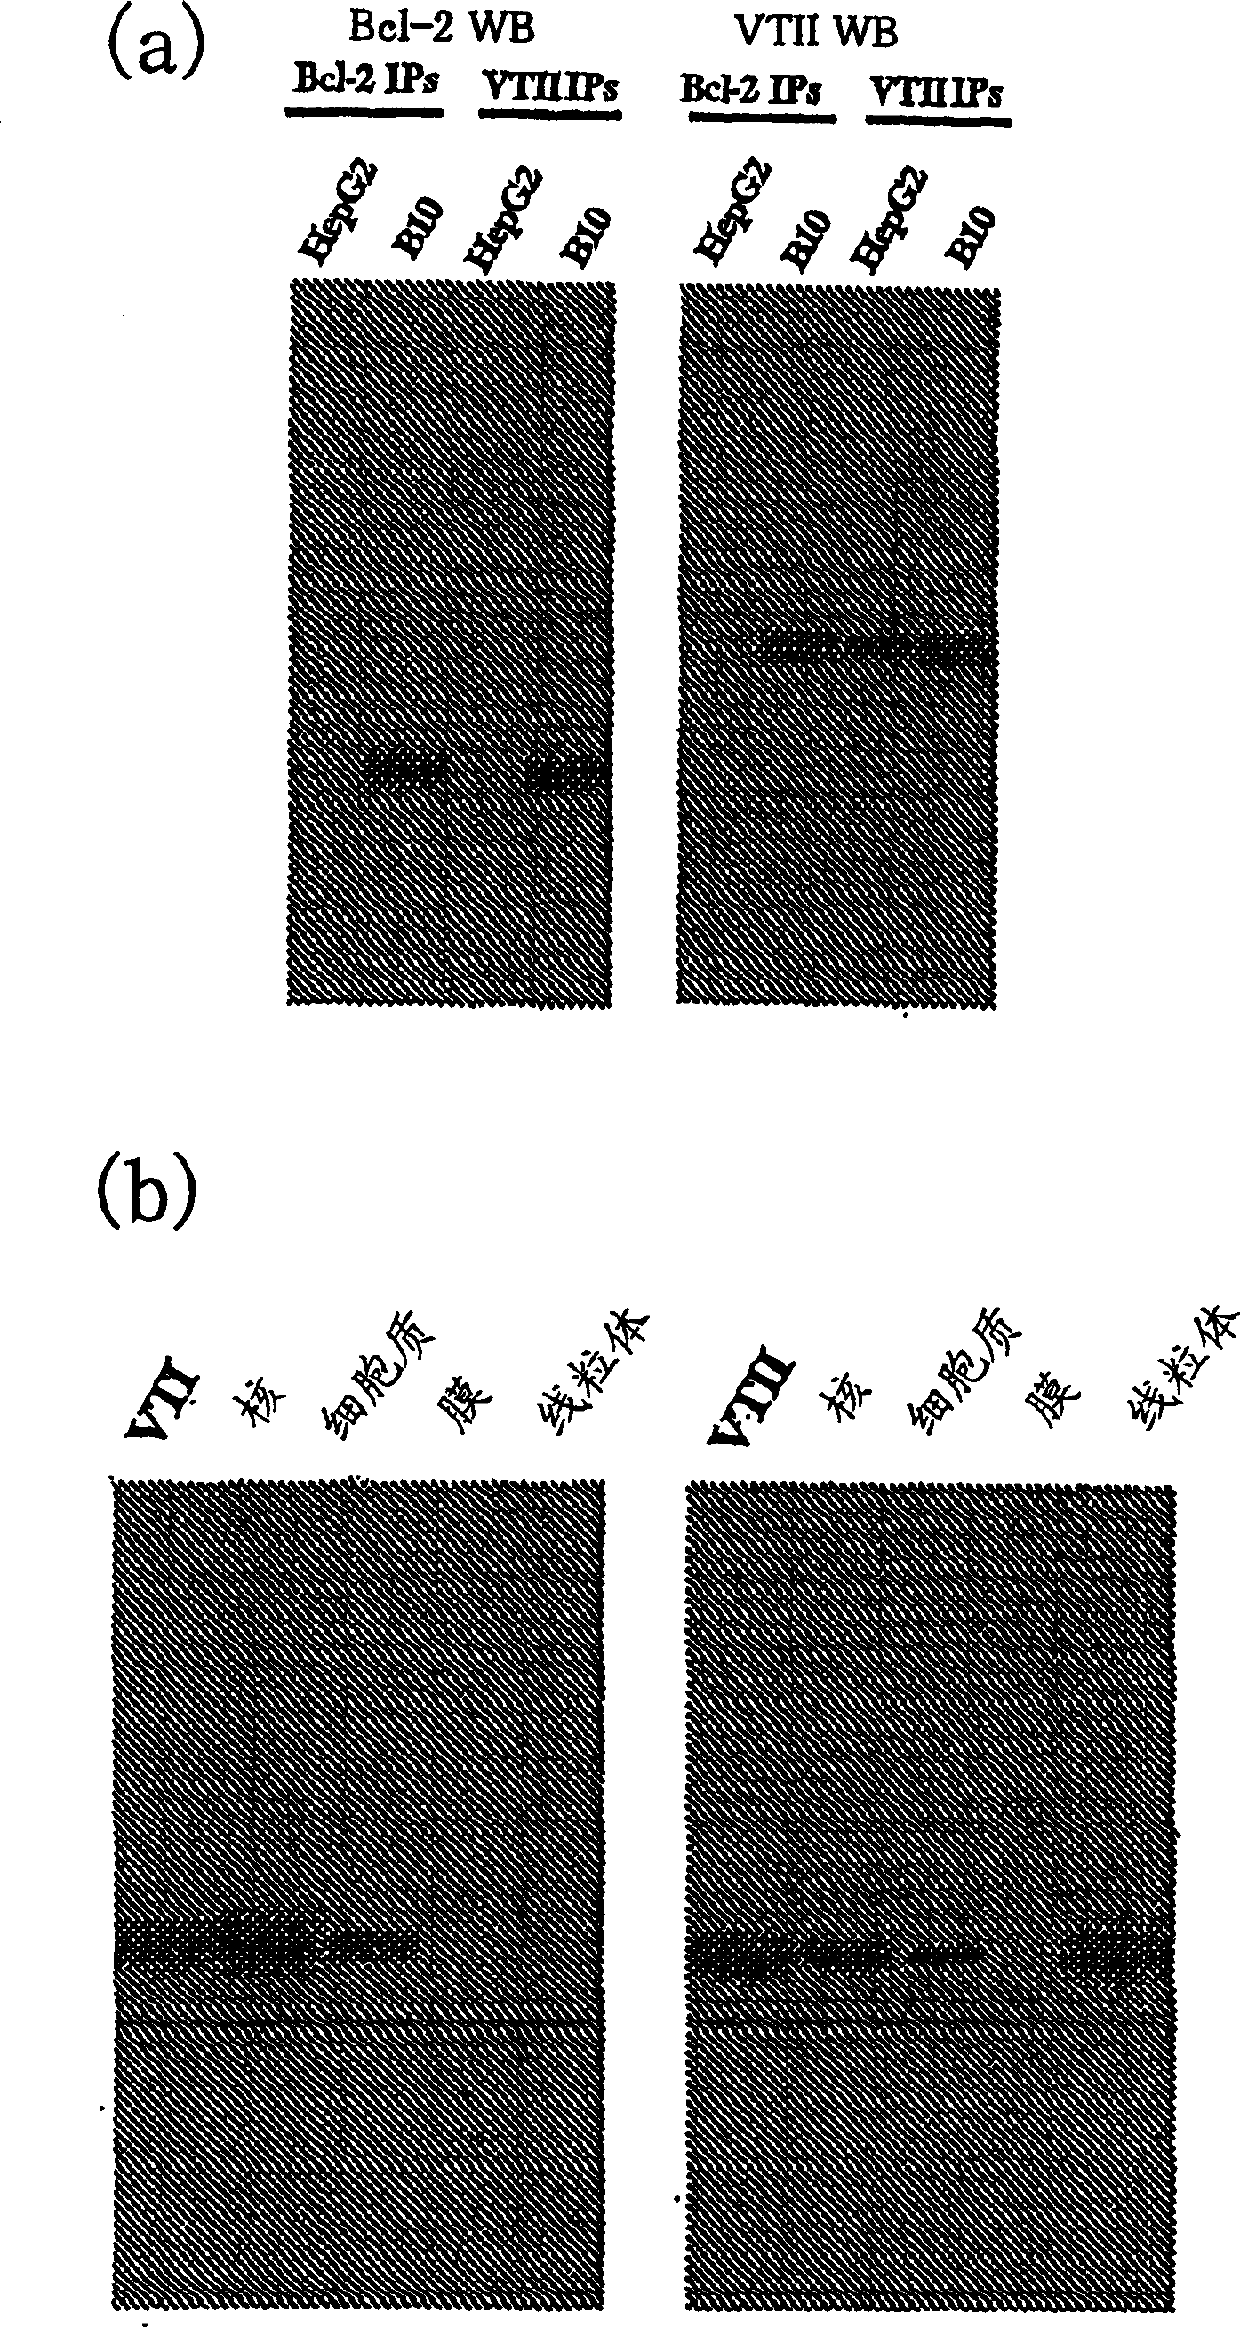 Method of anticipating interaction between proteins